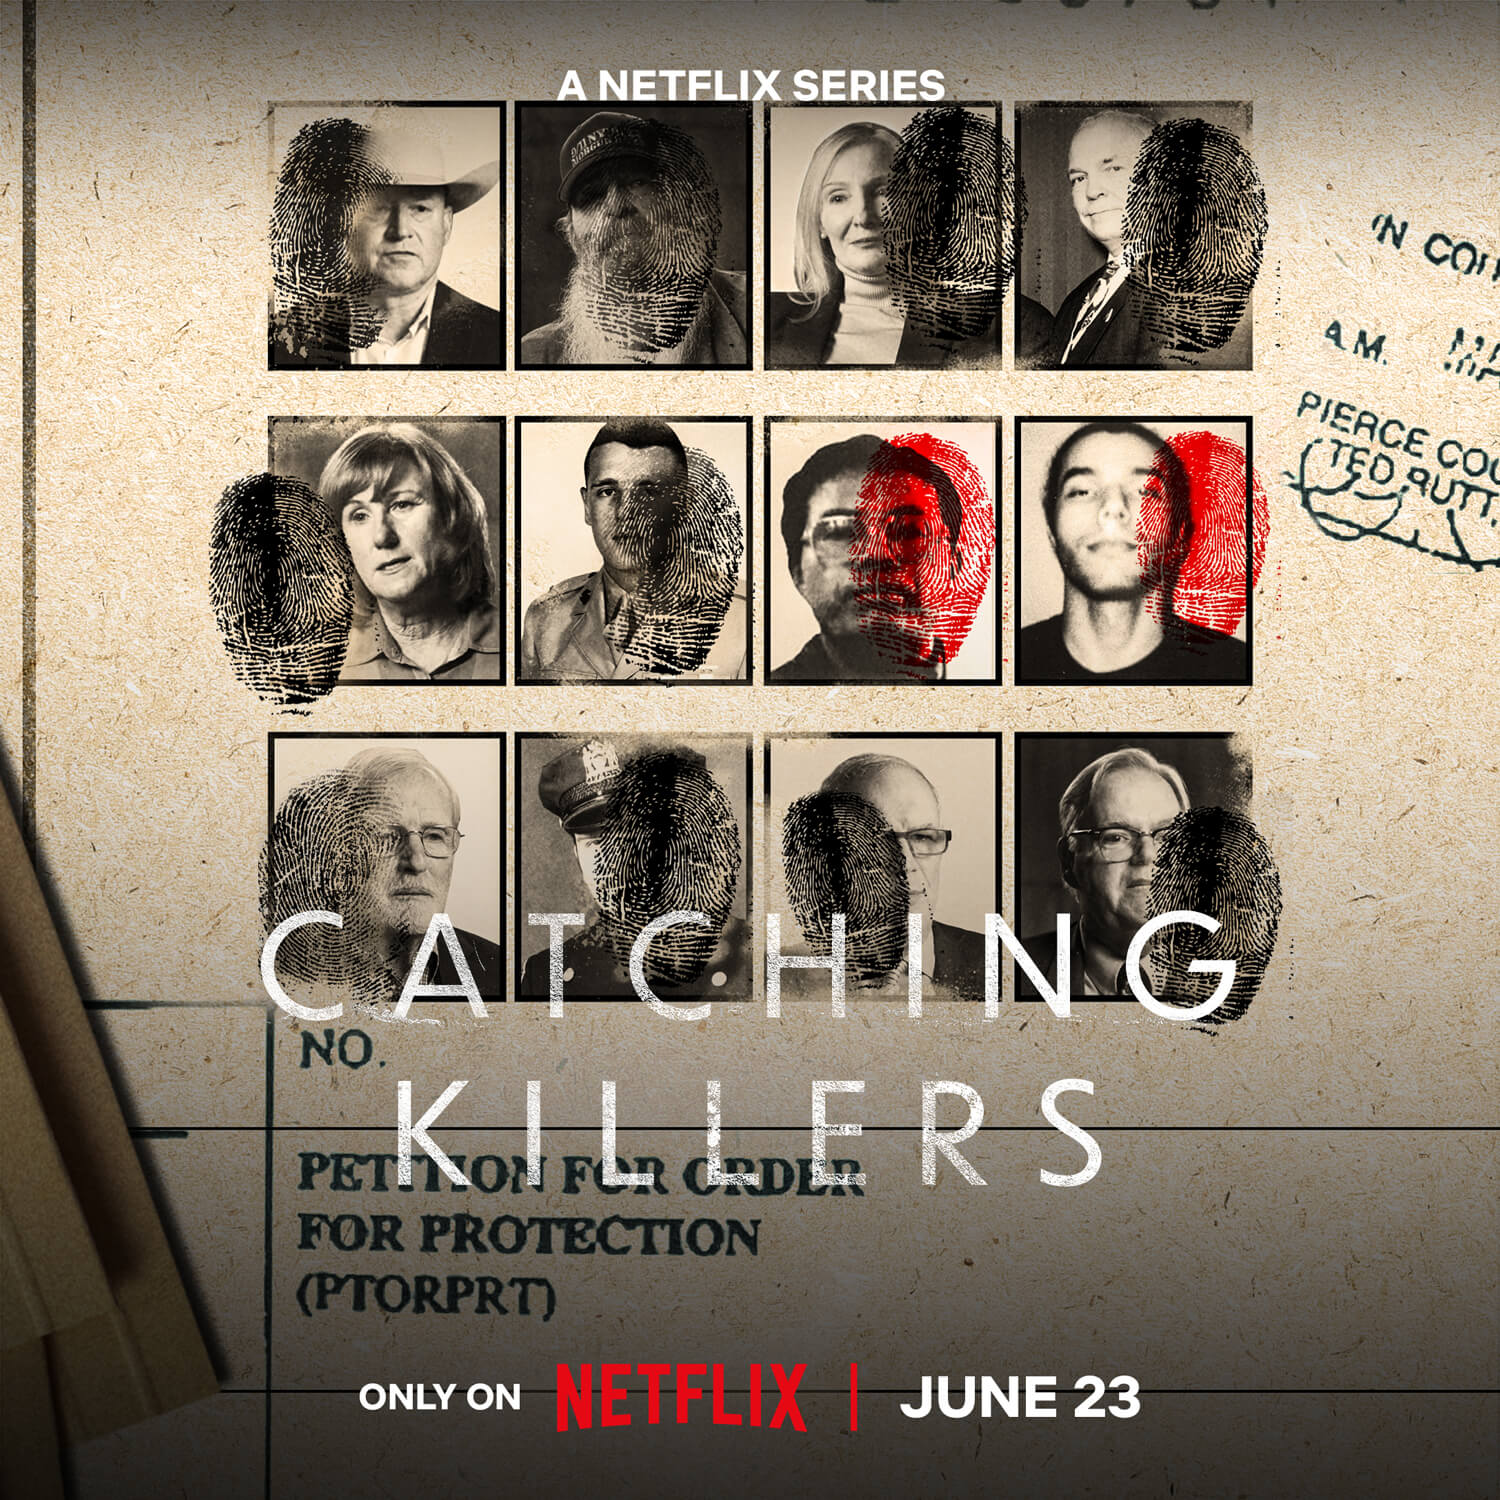 Catching Killers: Netflix just added a new season of this true crime series